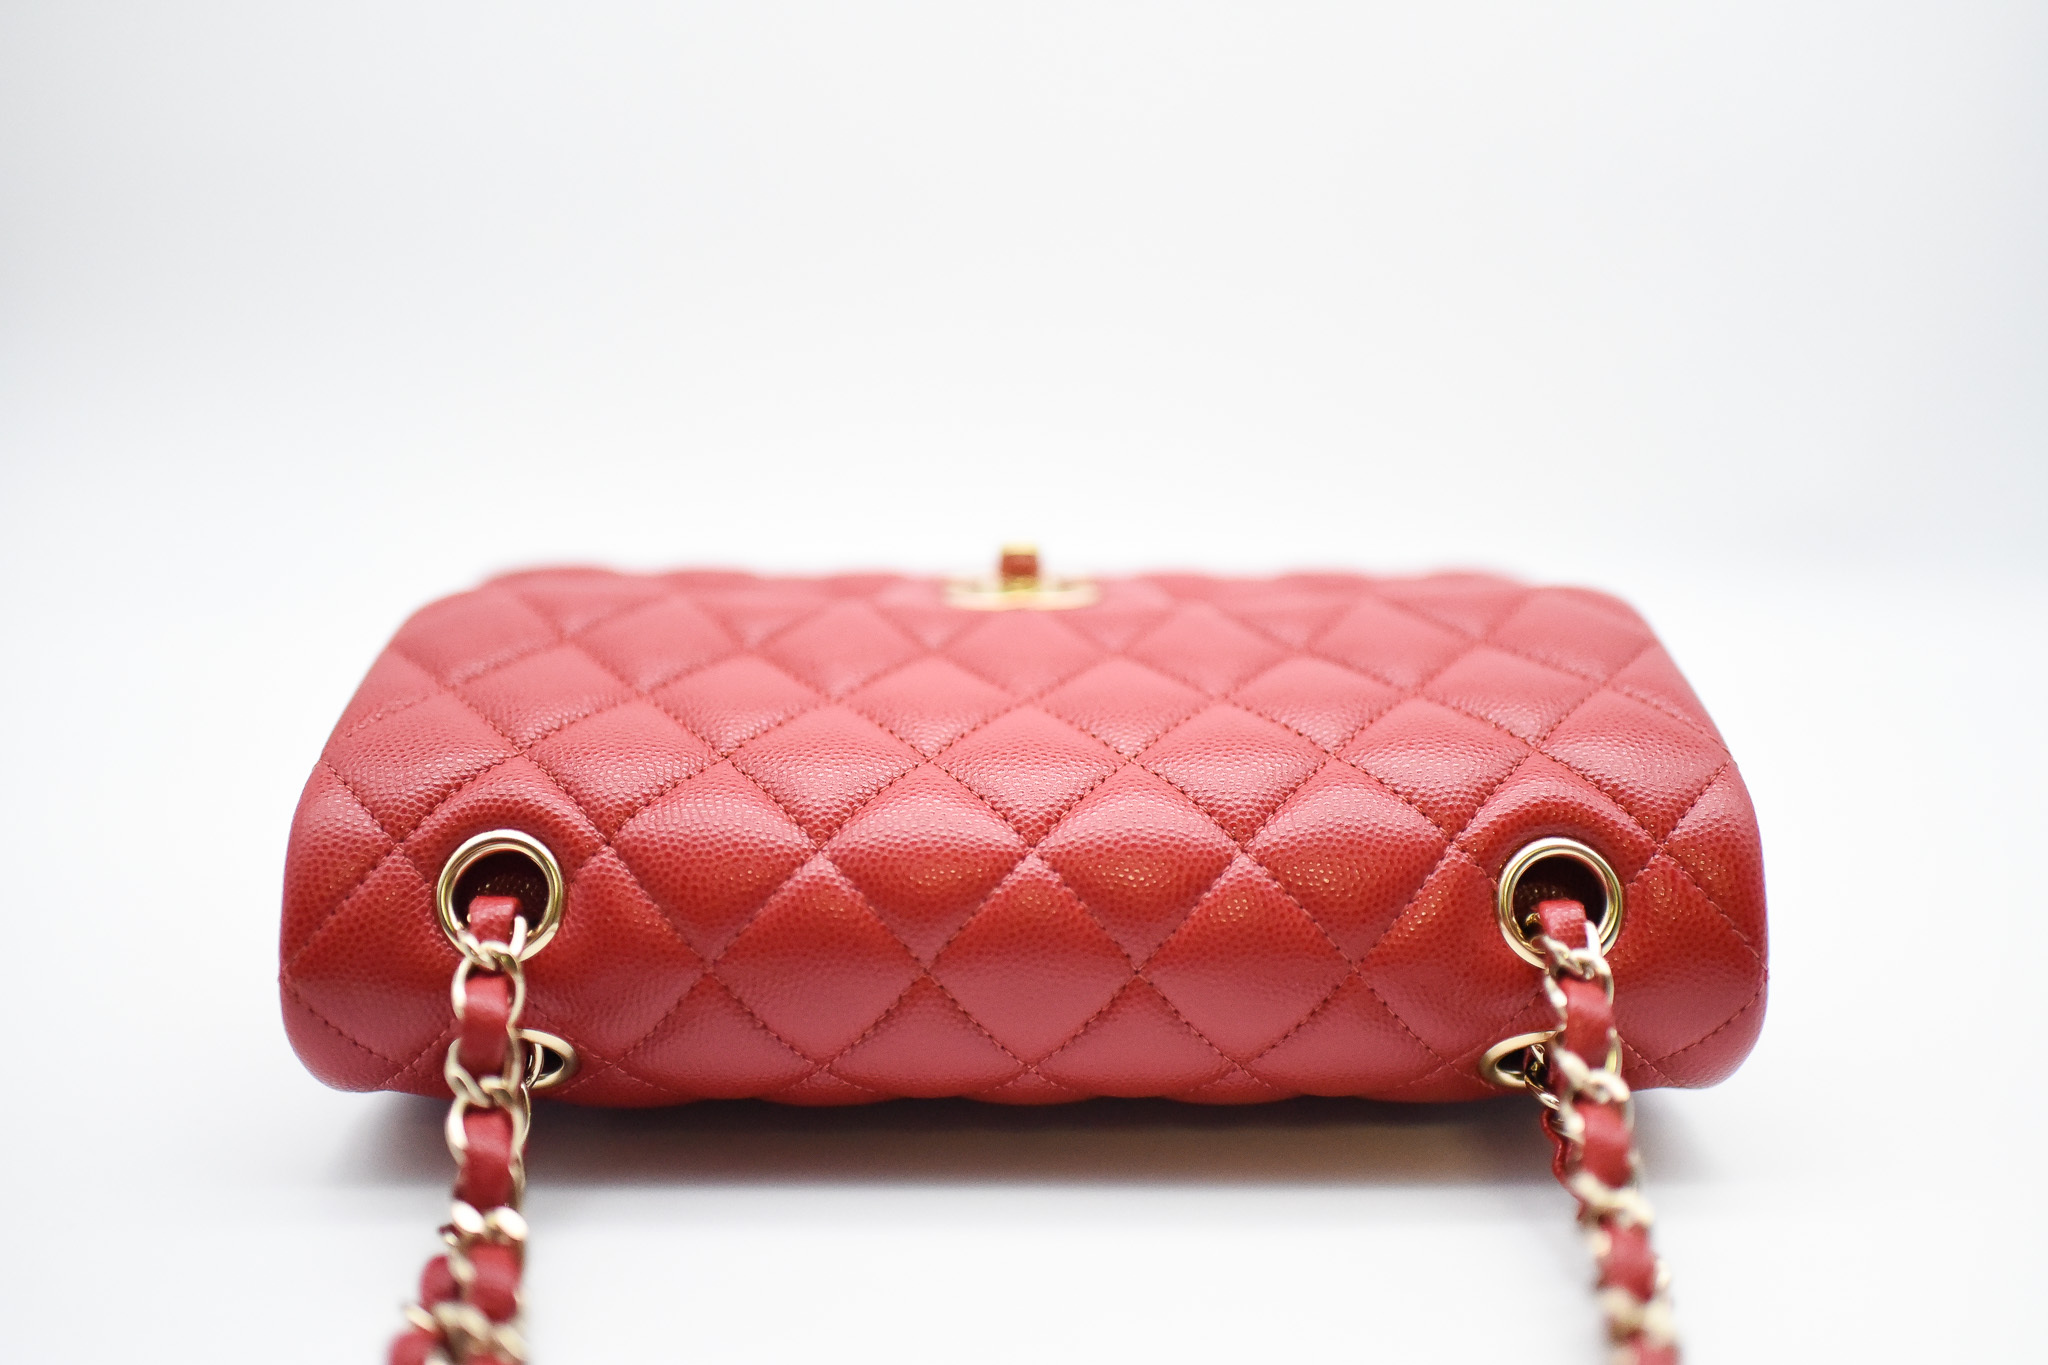 Chanel Classic Flap Small, Red Caviar Leather with Gold Hardware, Preowned  in Box MA001 - Julia Rose Boston